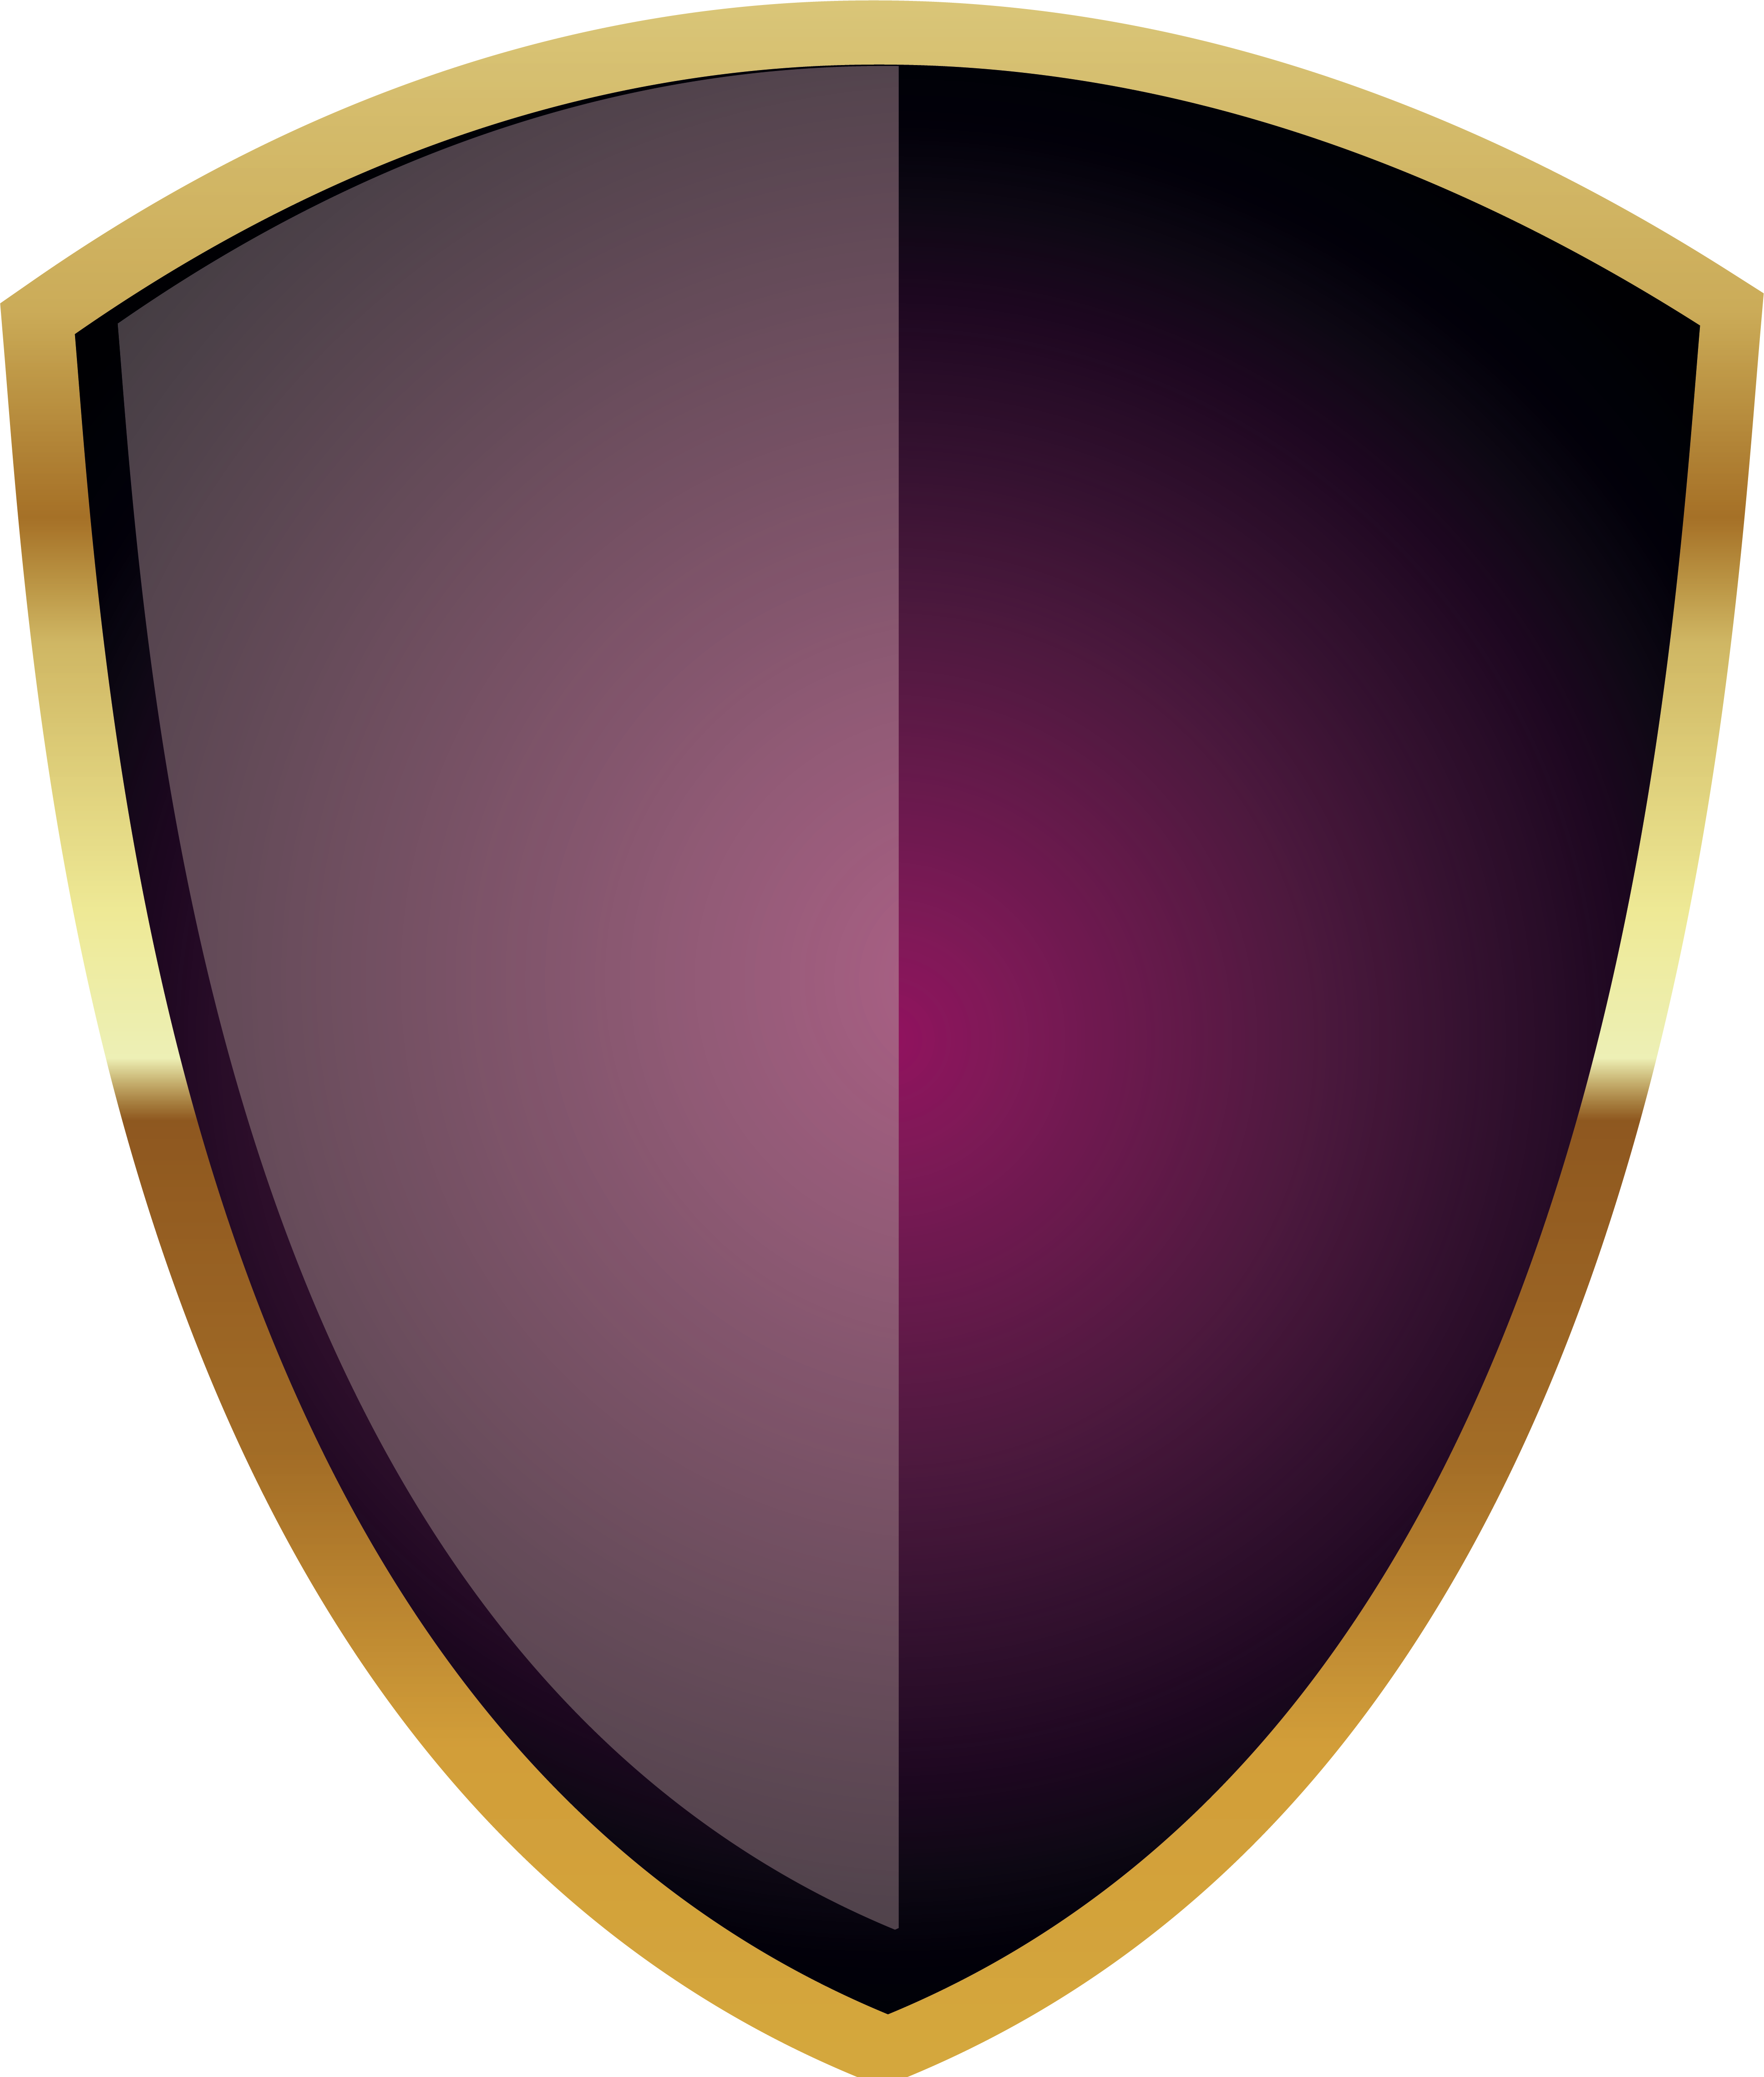 Warrior Shield Icon Free Transparent Image HD Clipart